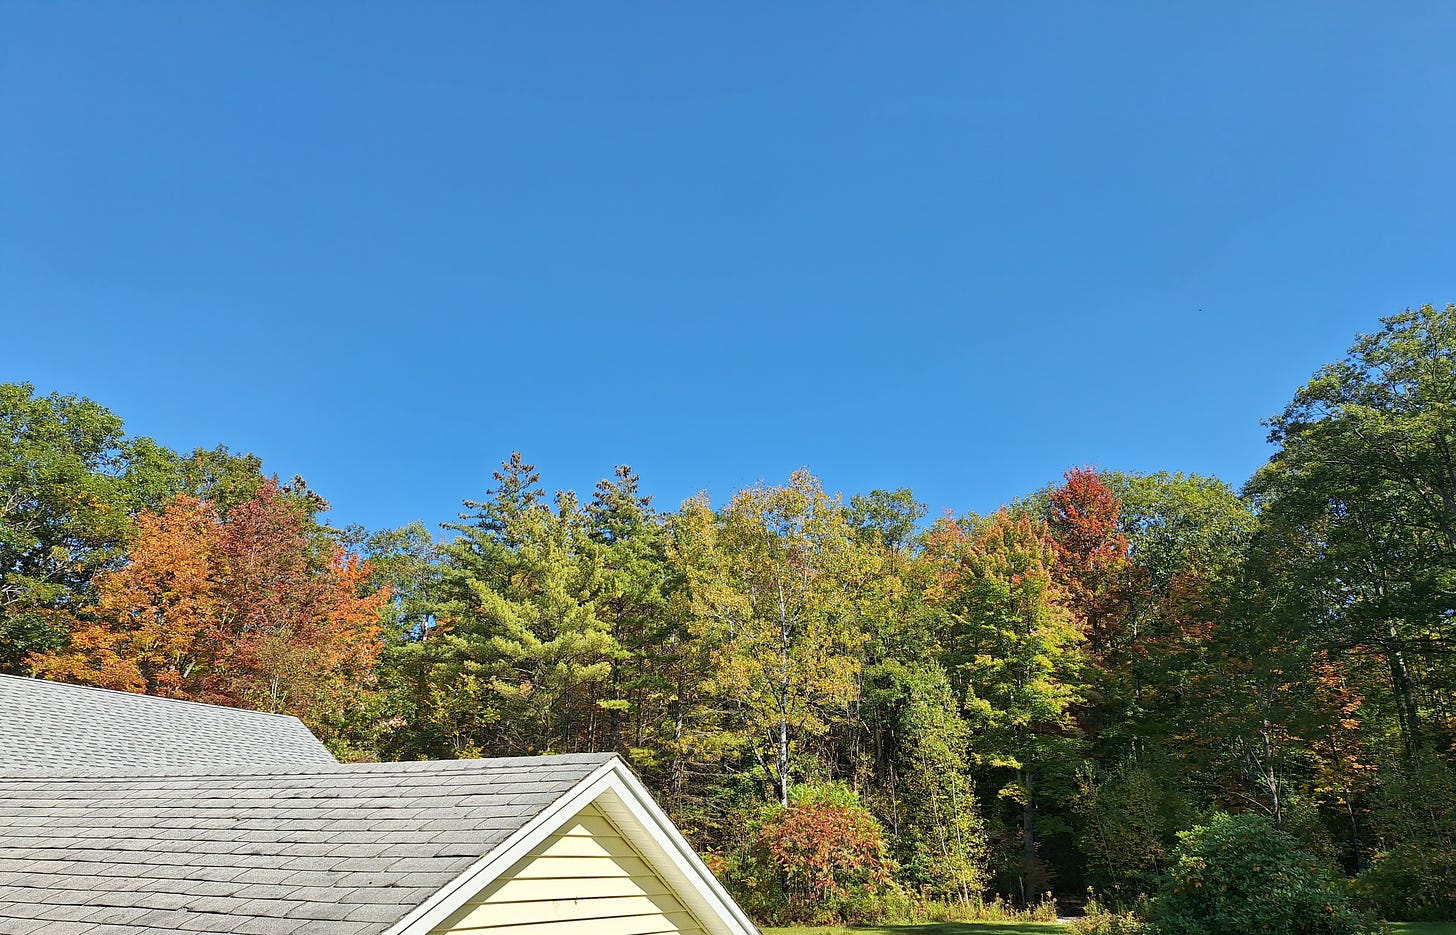 a picture of colorful trees in my backyard